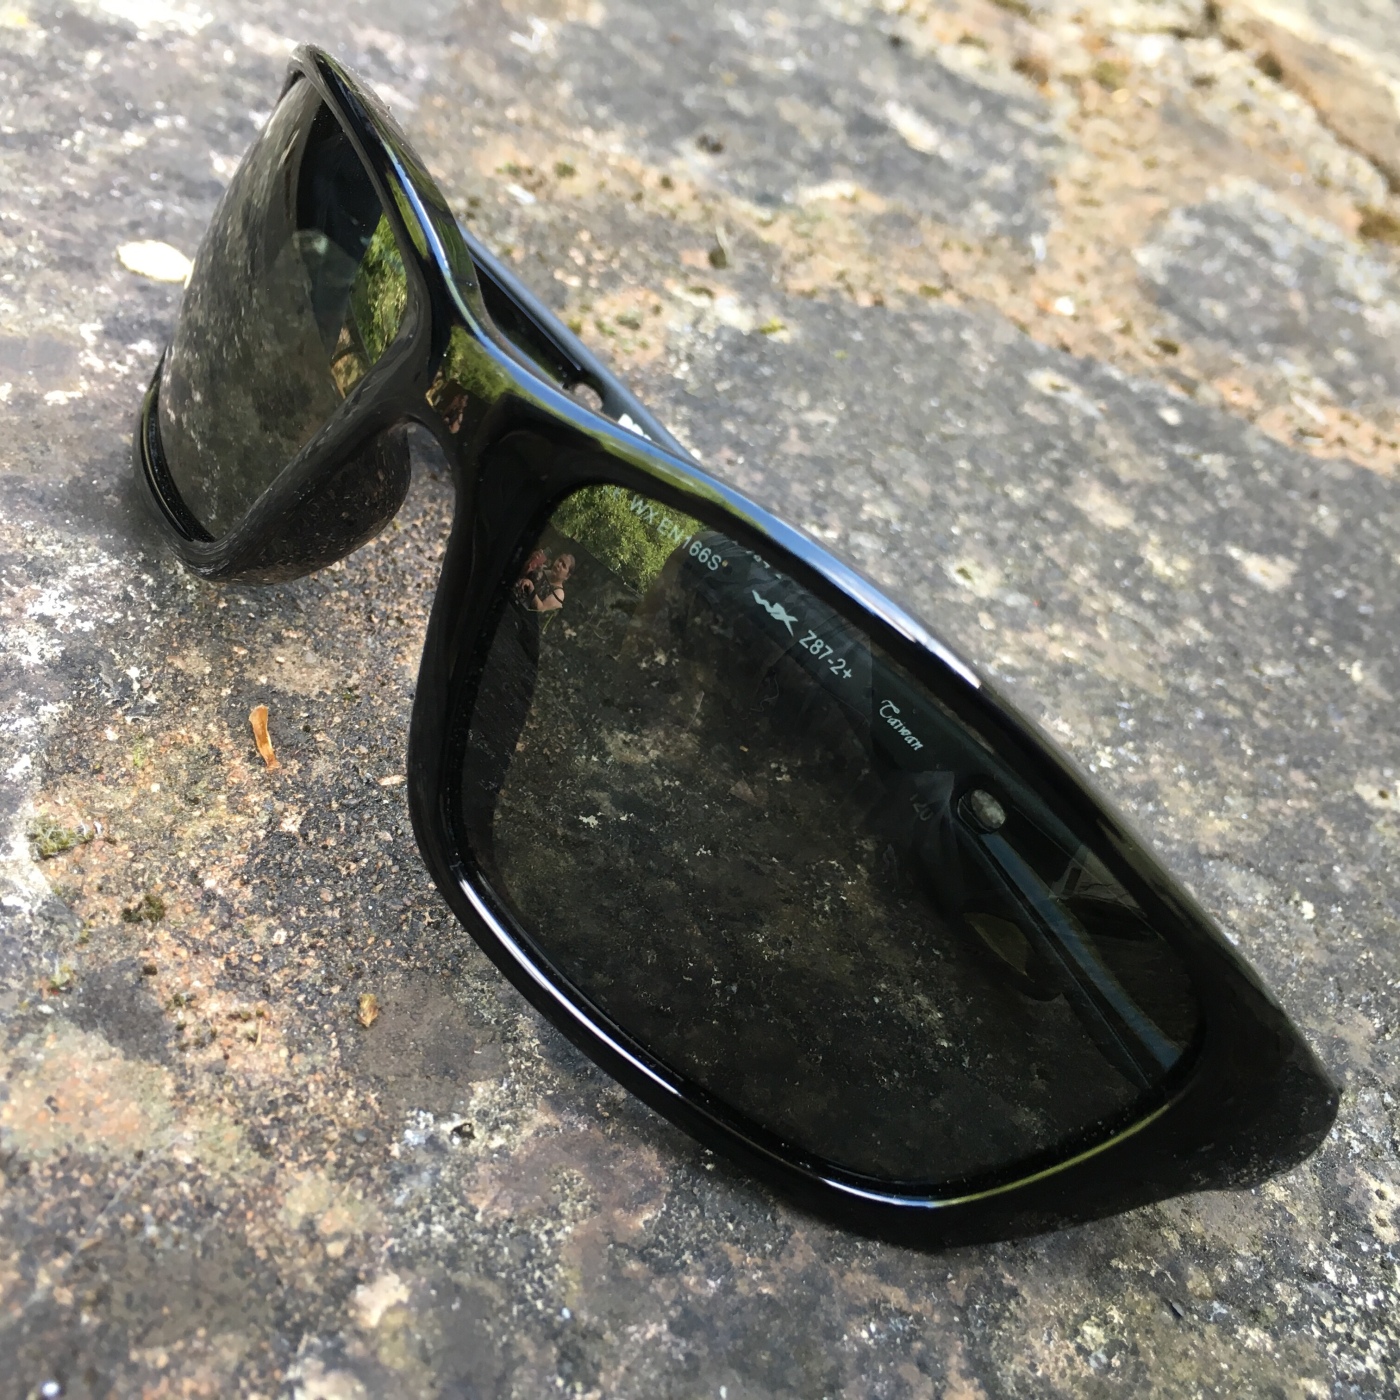 wiley x shooting glasses review